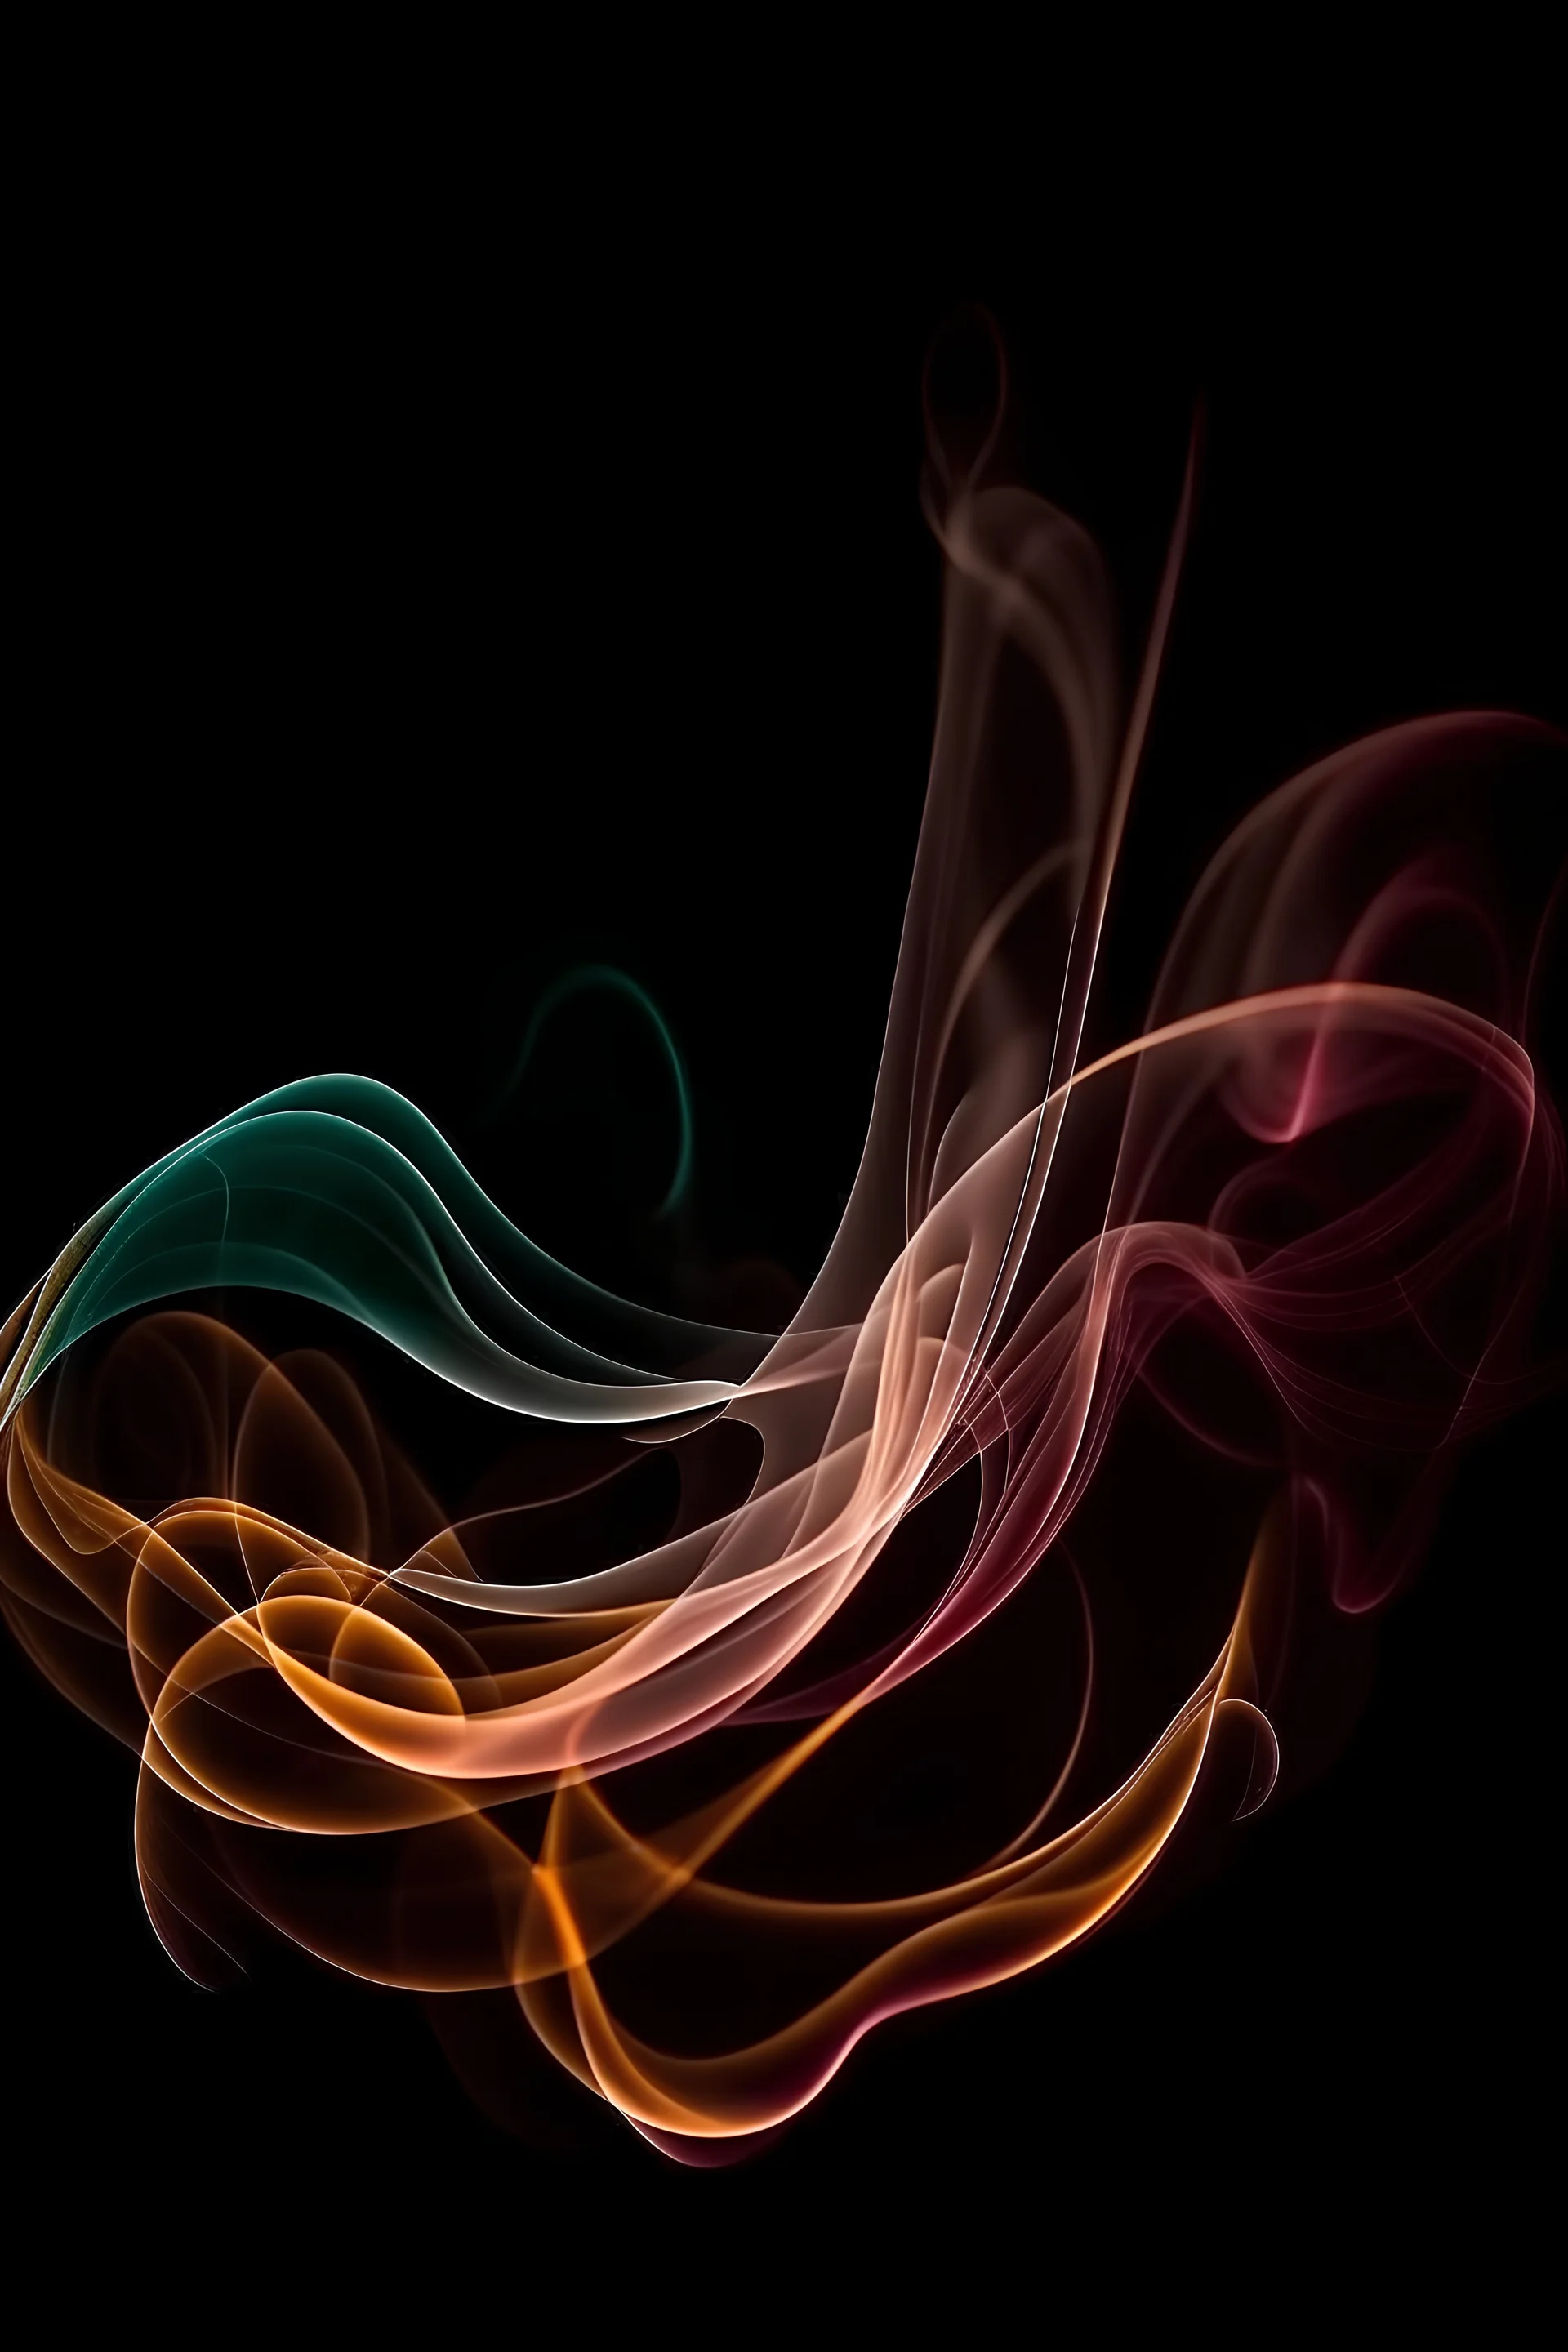 There are some shiny pastell smoke, fire sparks and simple geometric ornaments with fine white lines as decorative elements in the dark background